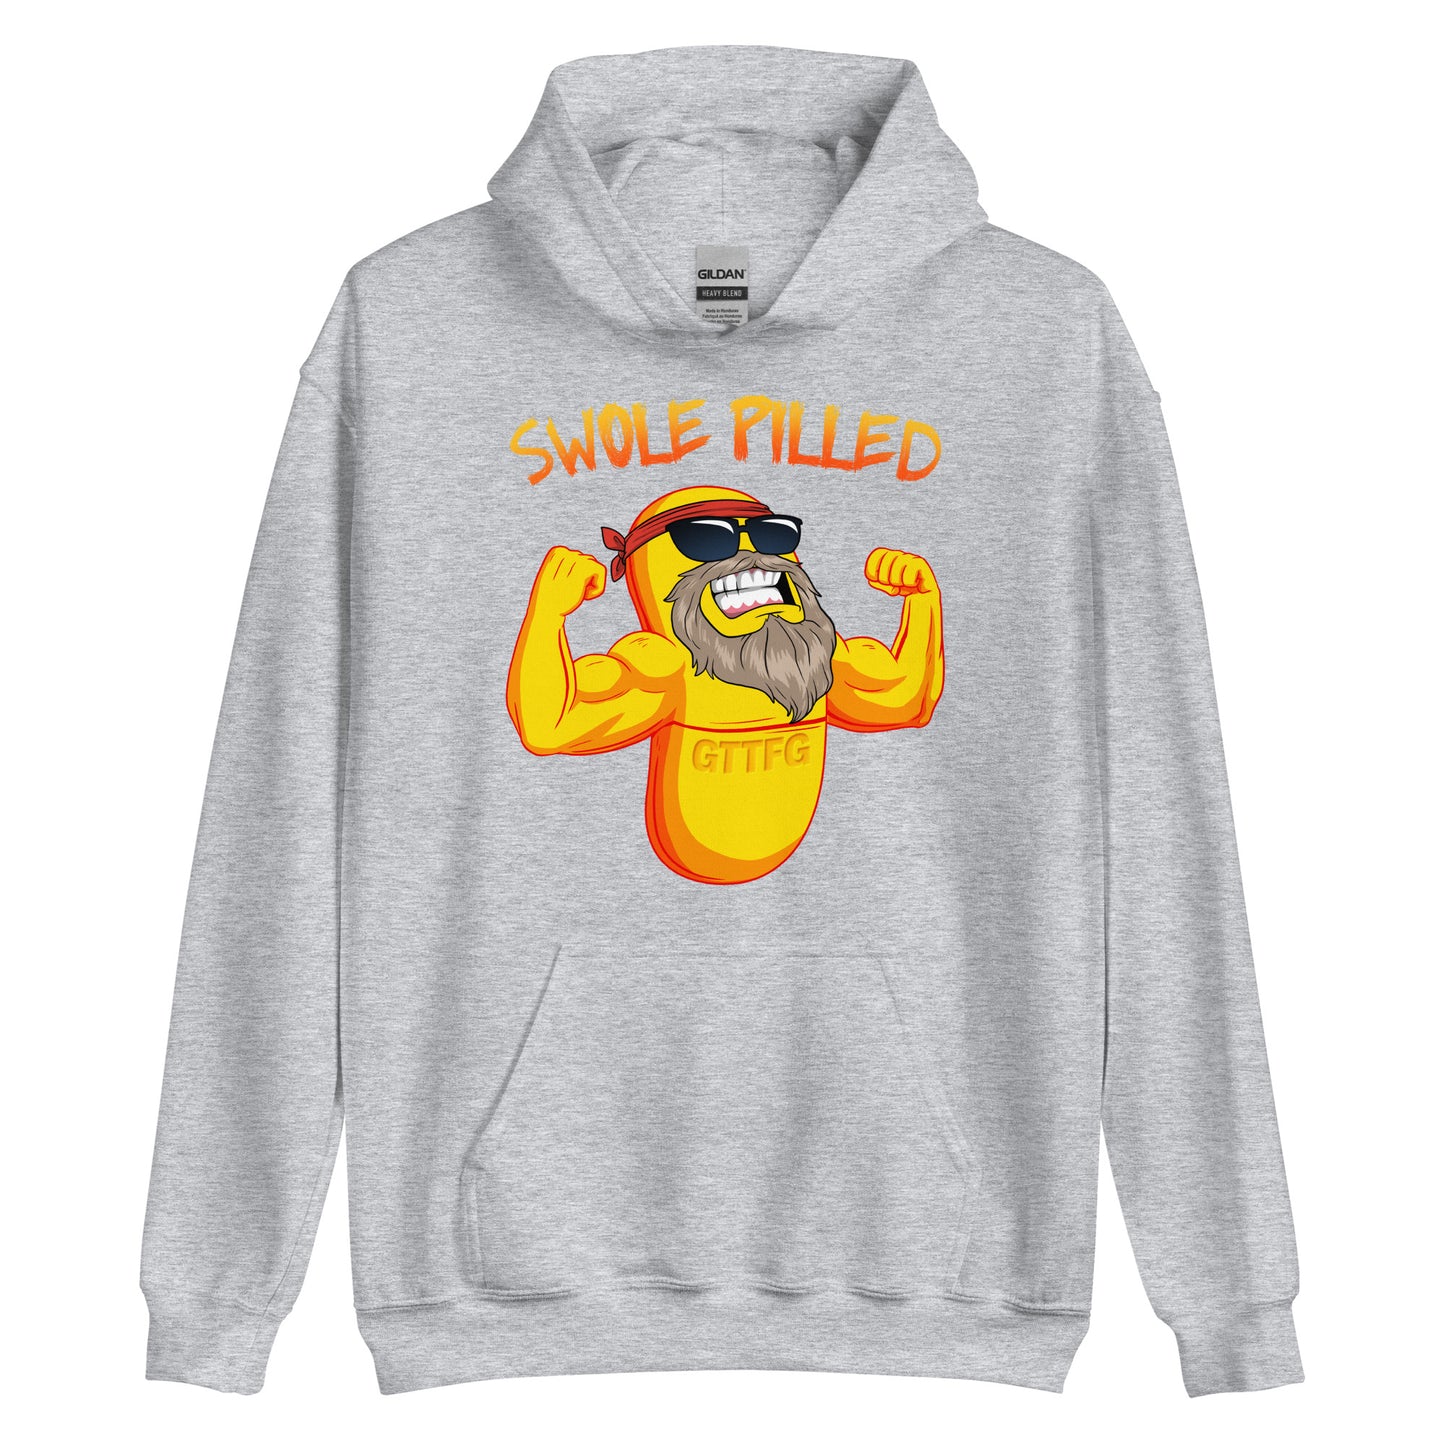 Swole Pilled Hoodie